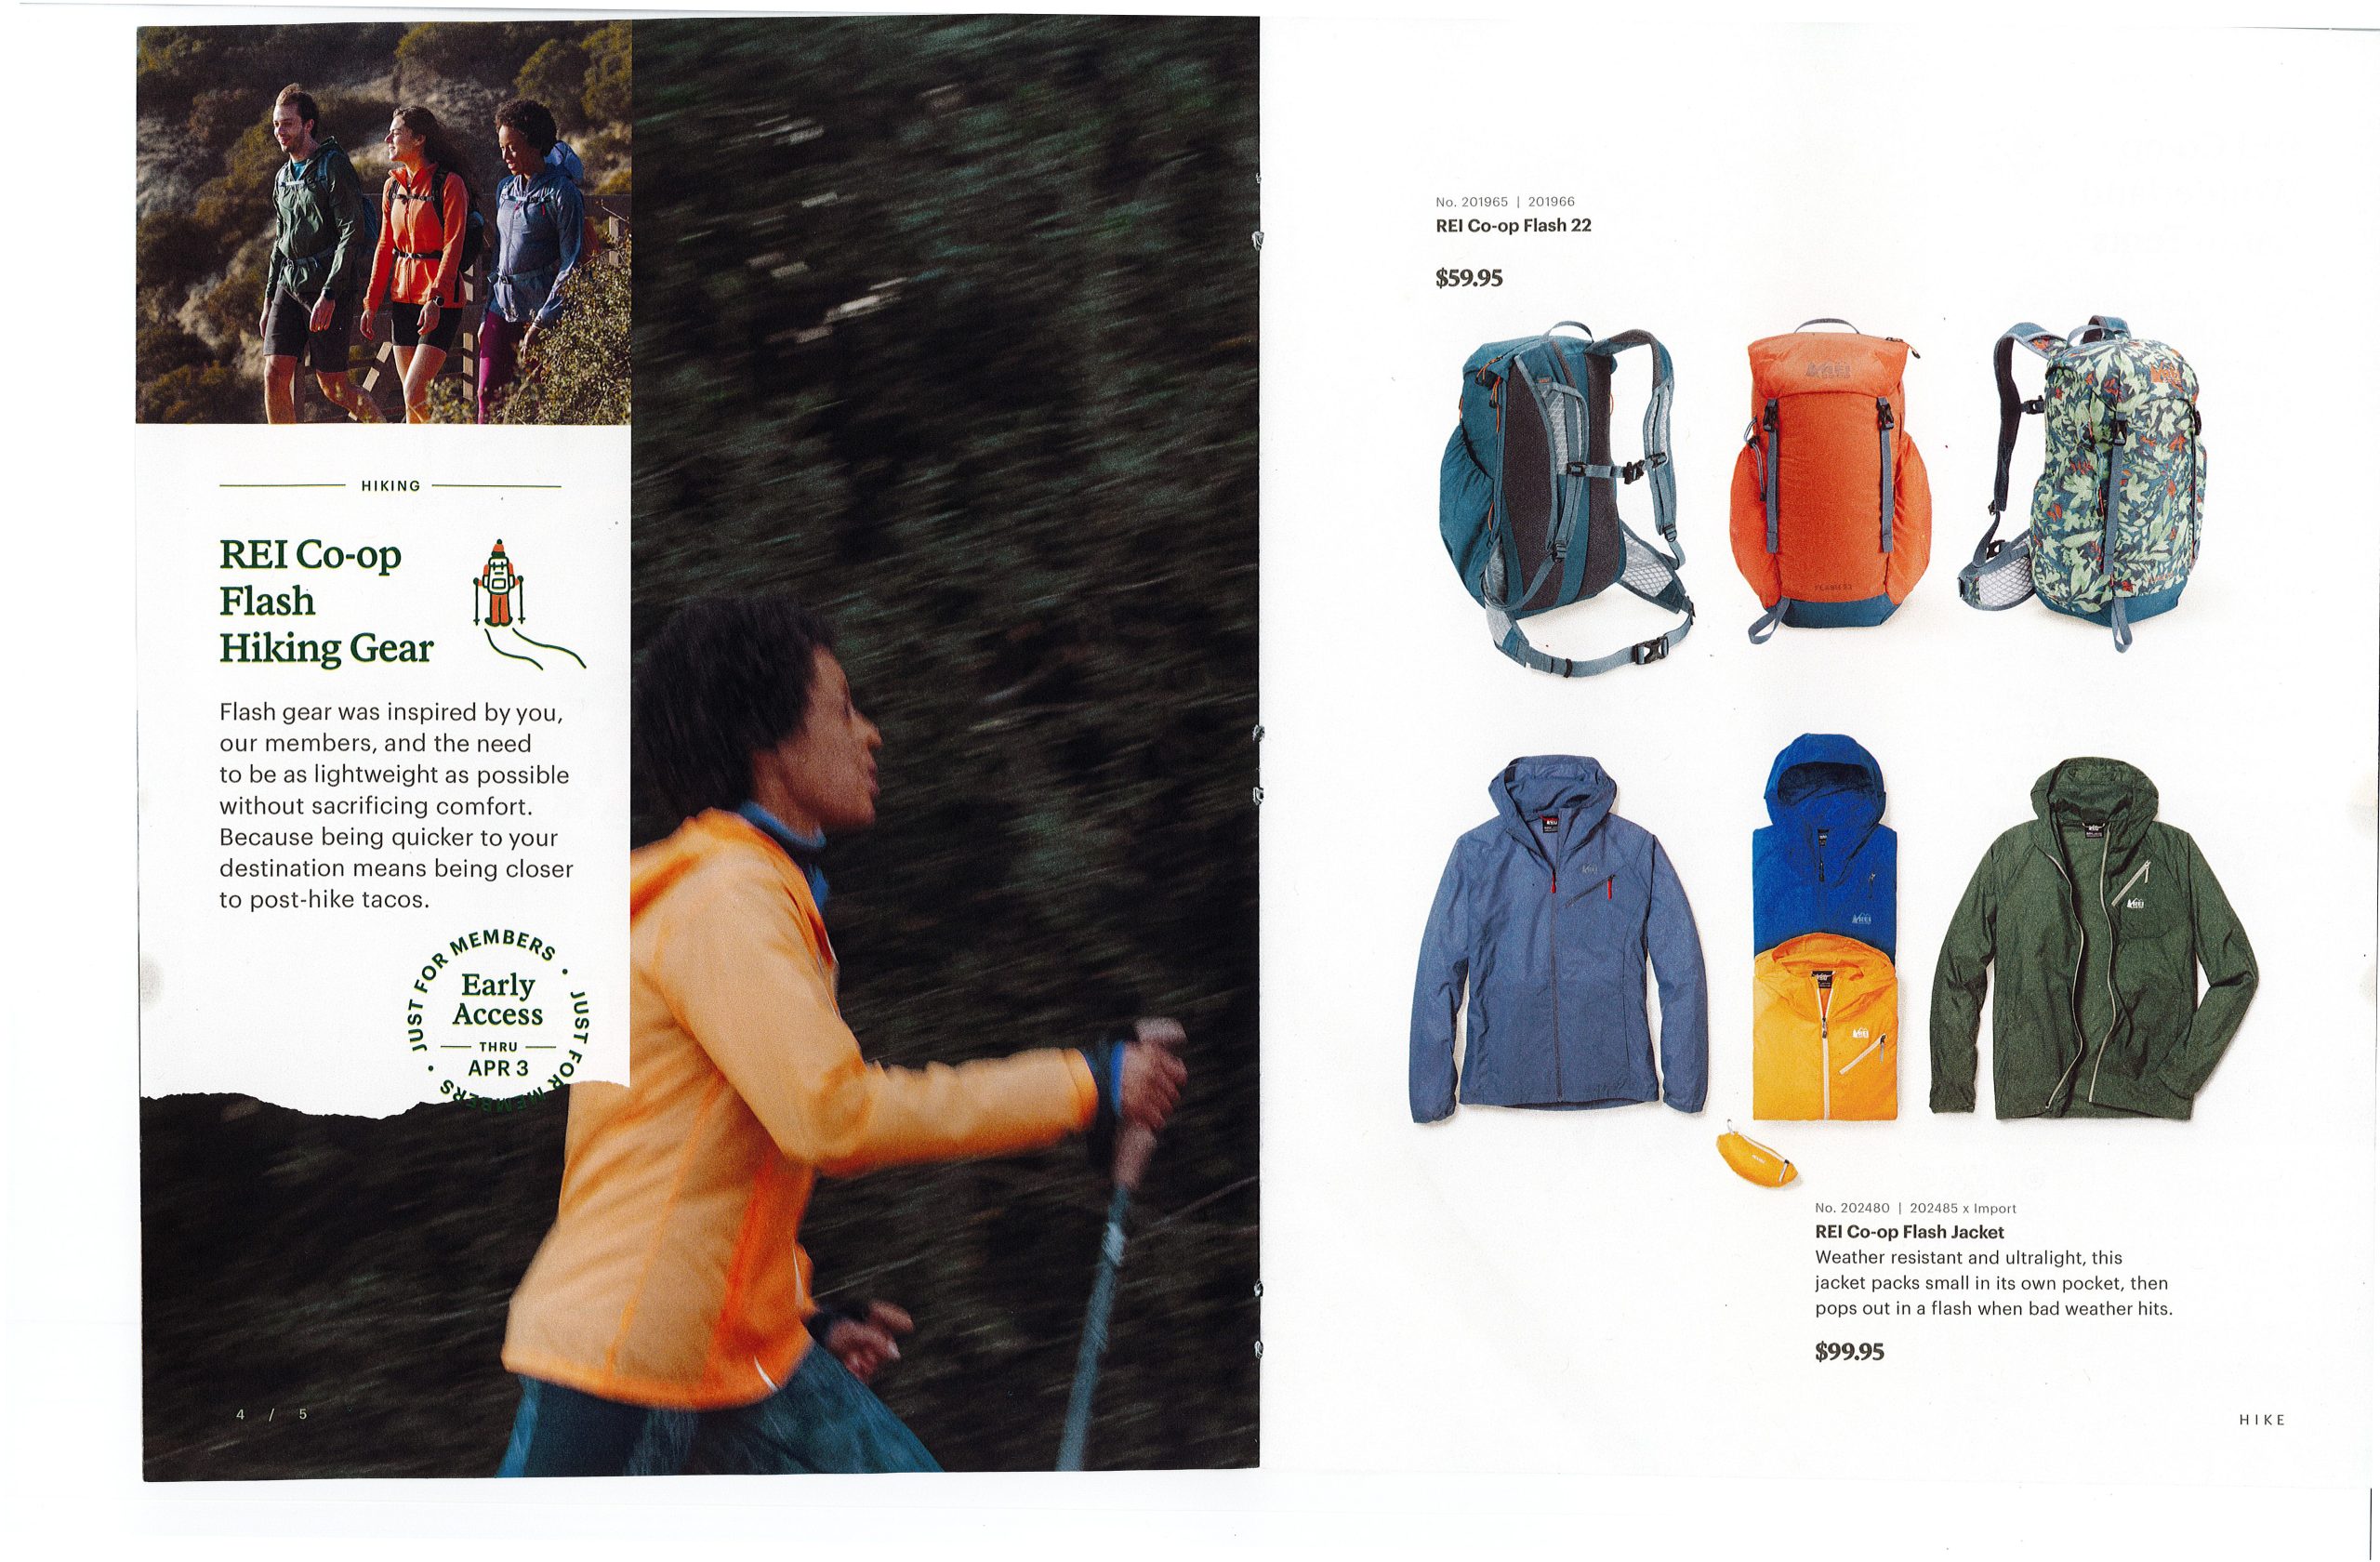 A catalog entry for REI Co-Op Flash Hiking Gear. It shows numerous products and their prices.